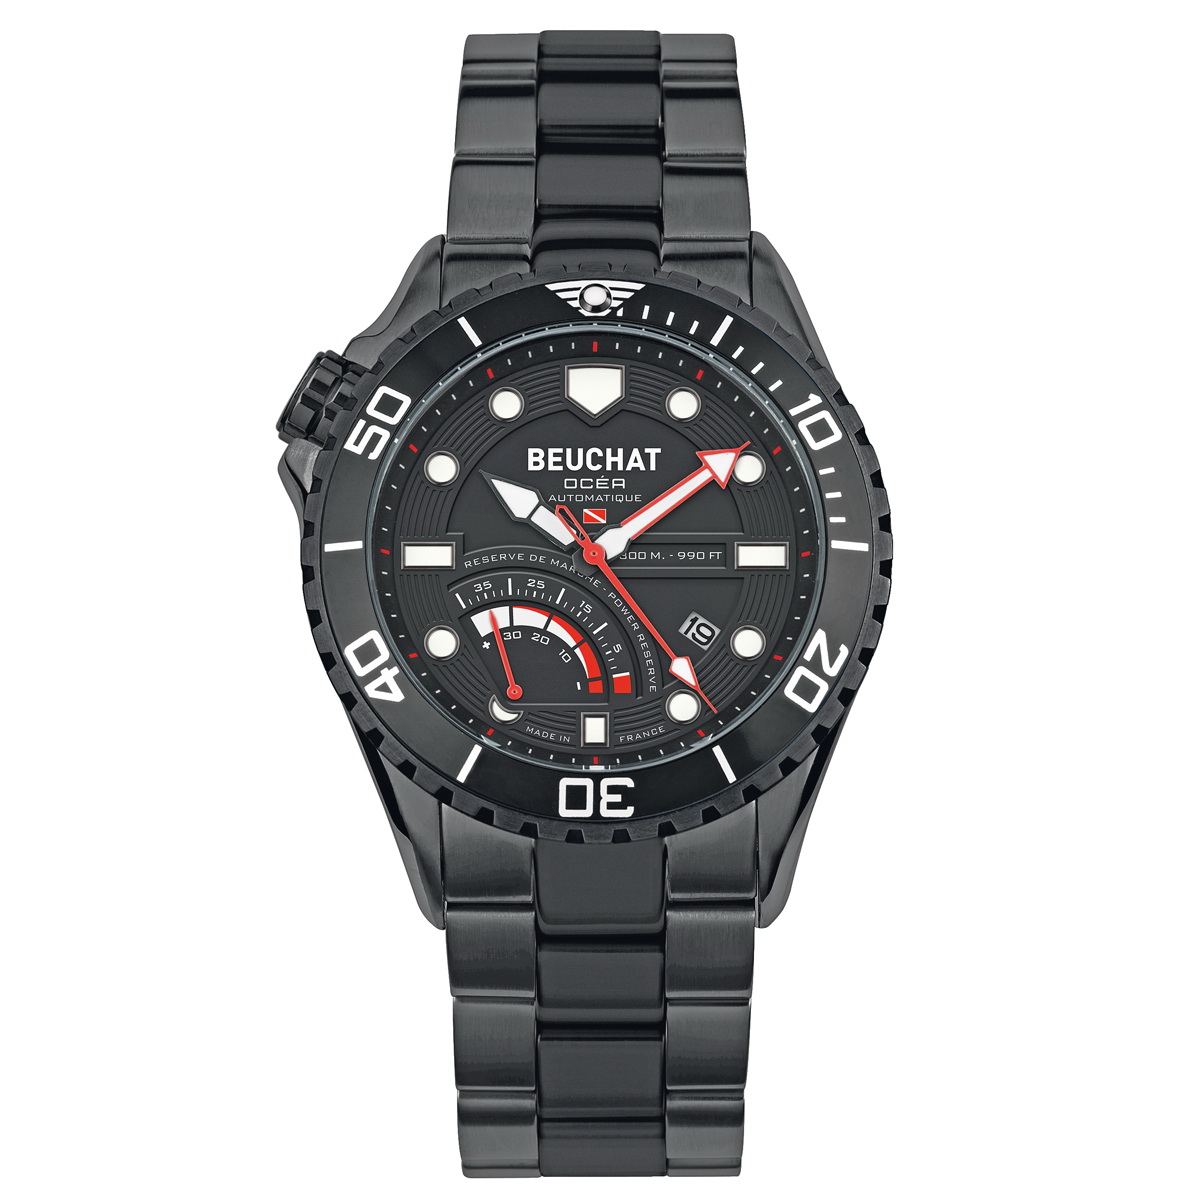 Beuchat's new Ocea Automatic Power Reserve BEUCHAT%2BOc%25C3%25A9a%2BAutomatic%2BPOWER-RESERVE%2B03